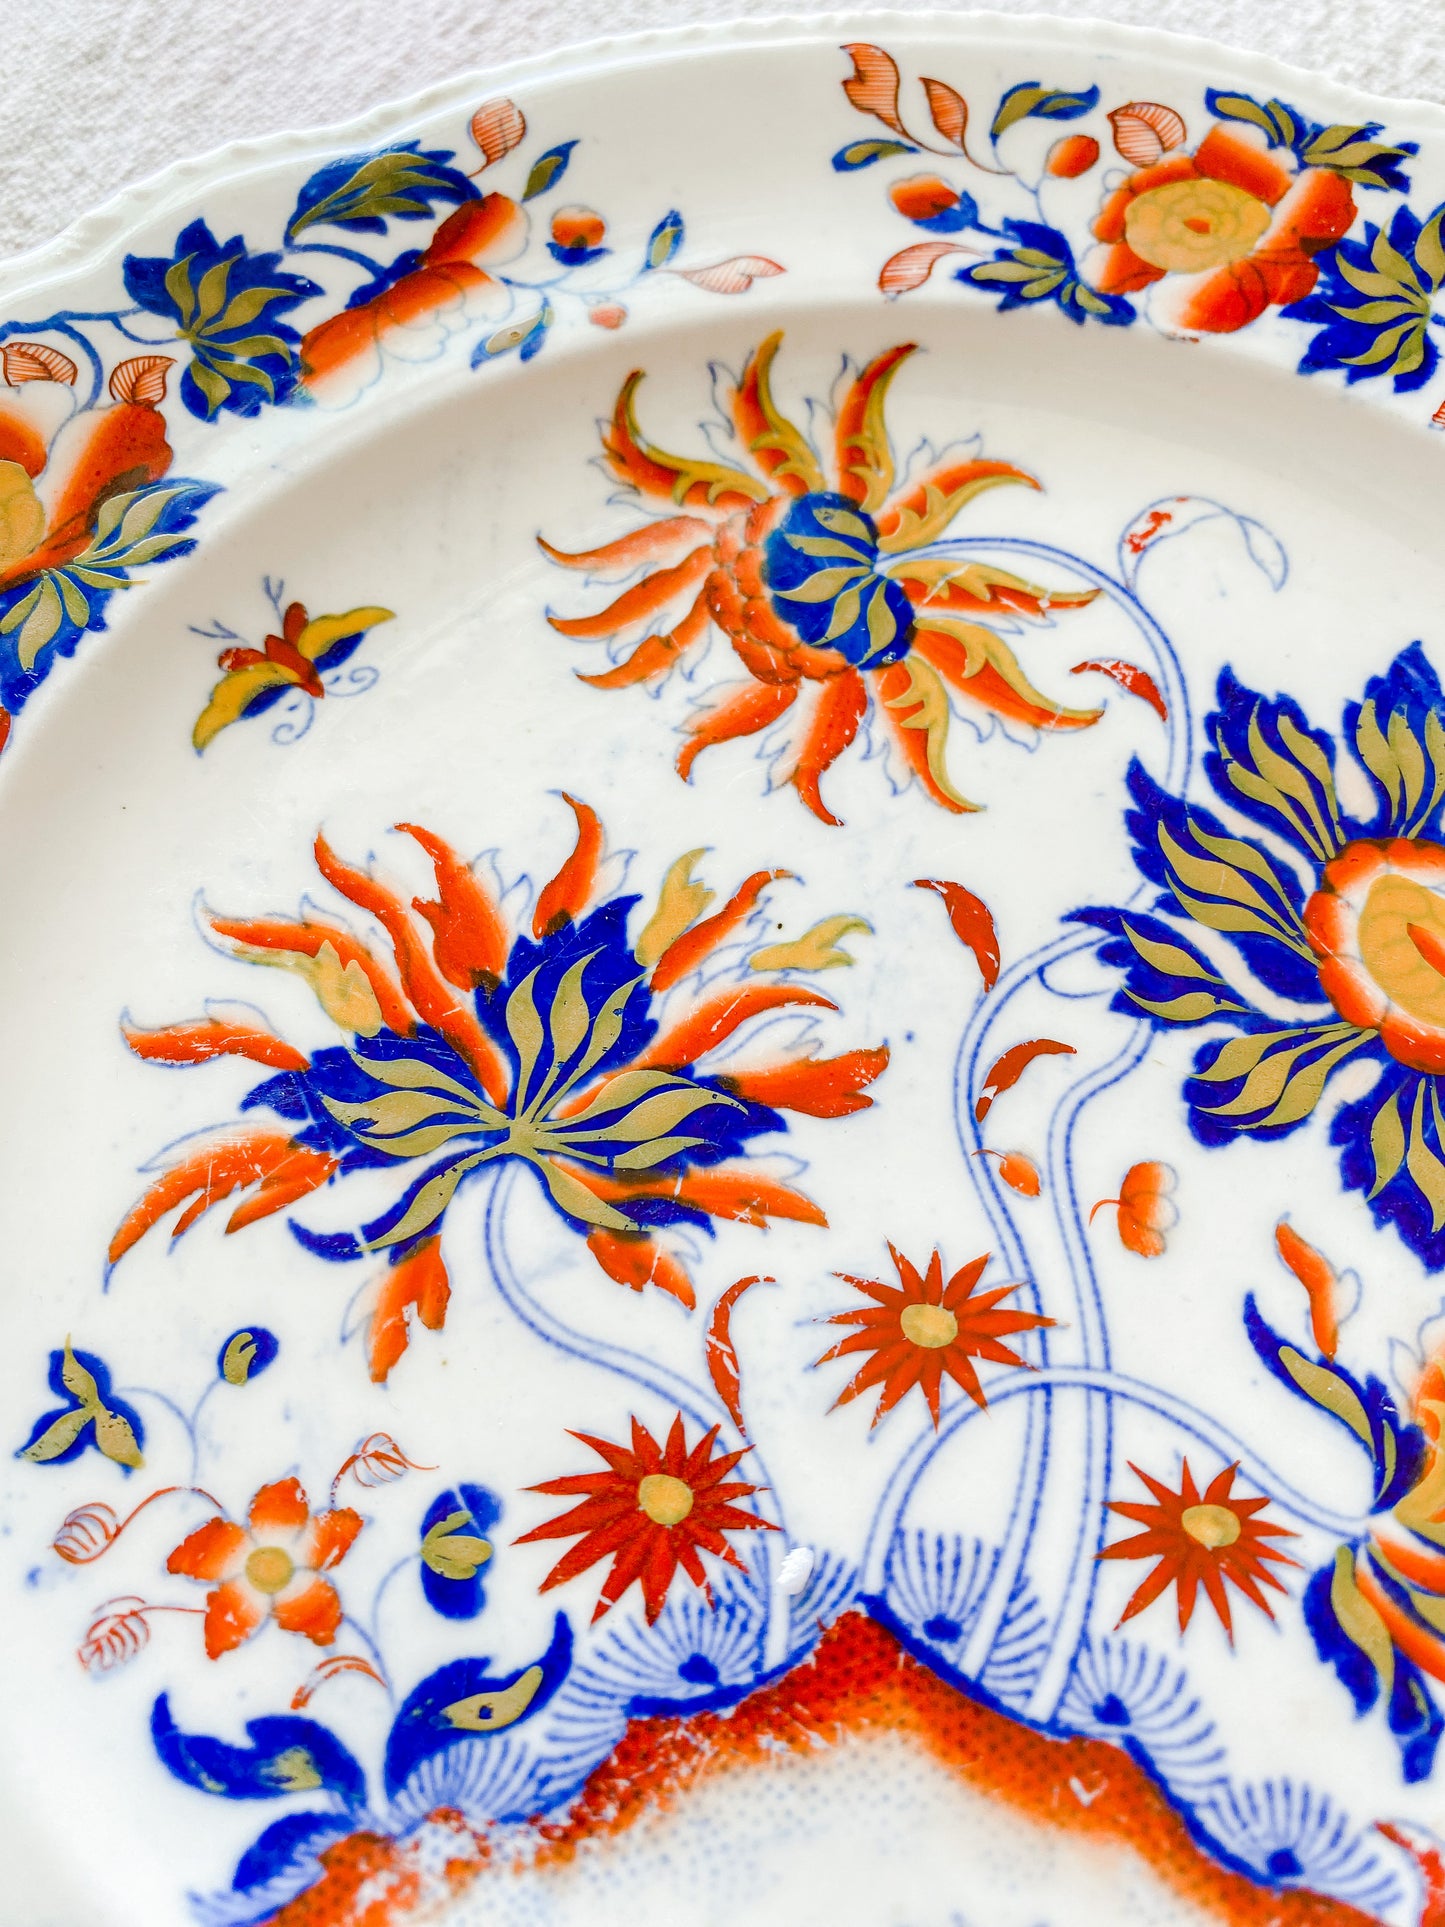 Antique Mid-1800s Ironstone Dinner Plate with Blue and Orange Floral Detail | Plate Wall Display | English Cottage Decor